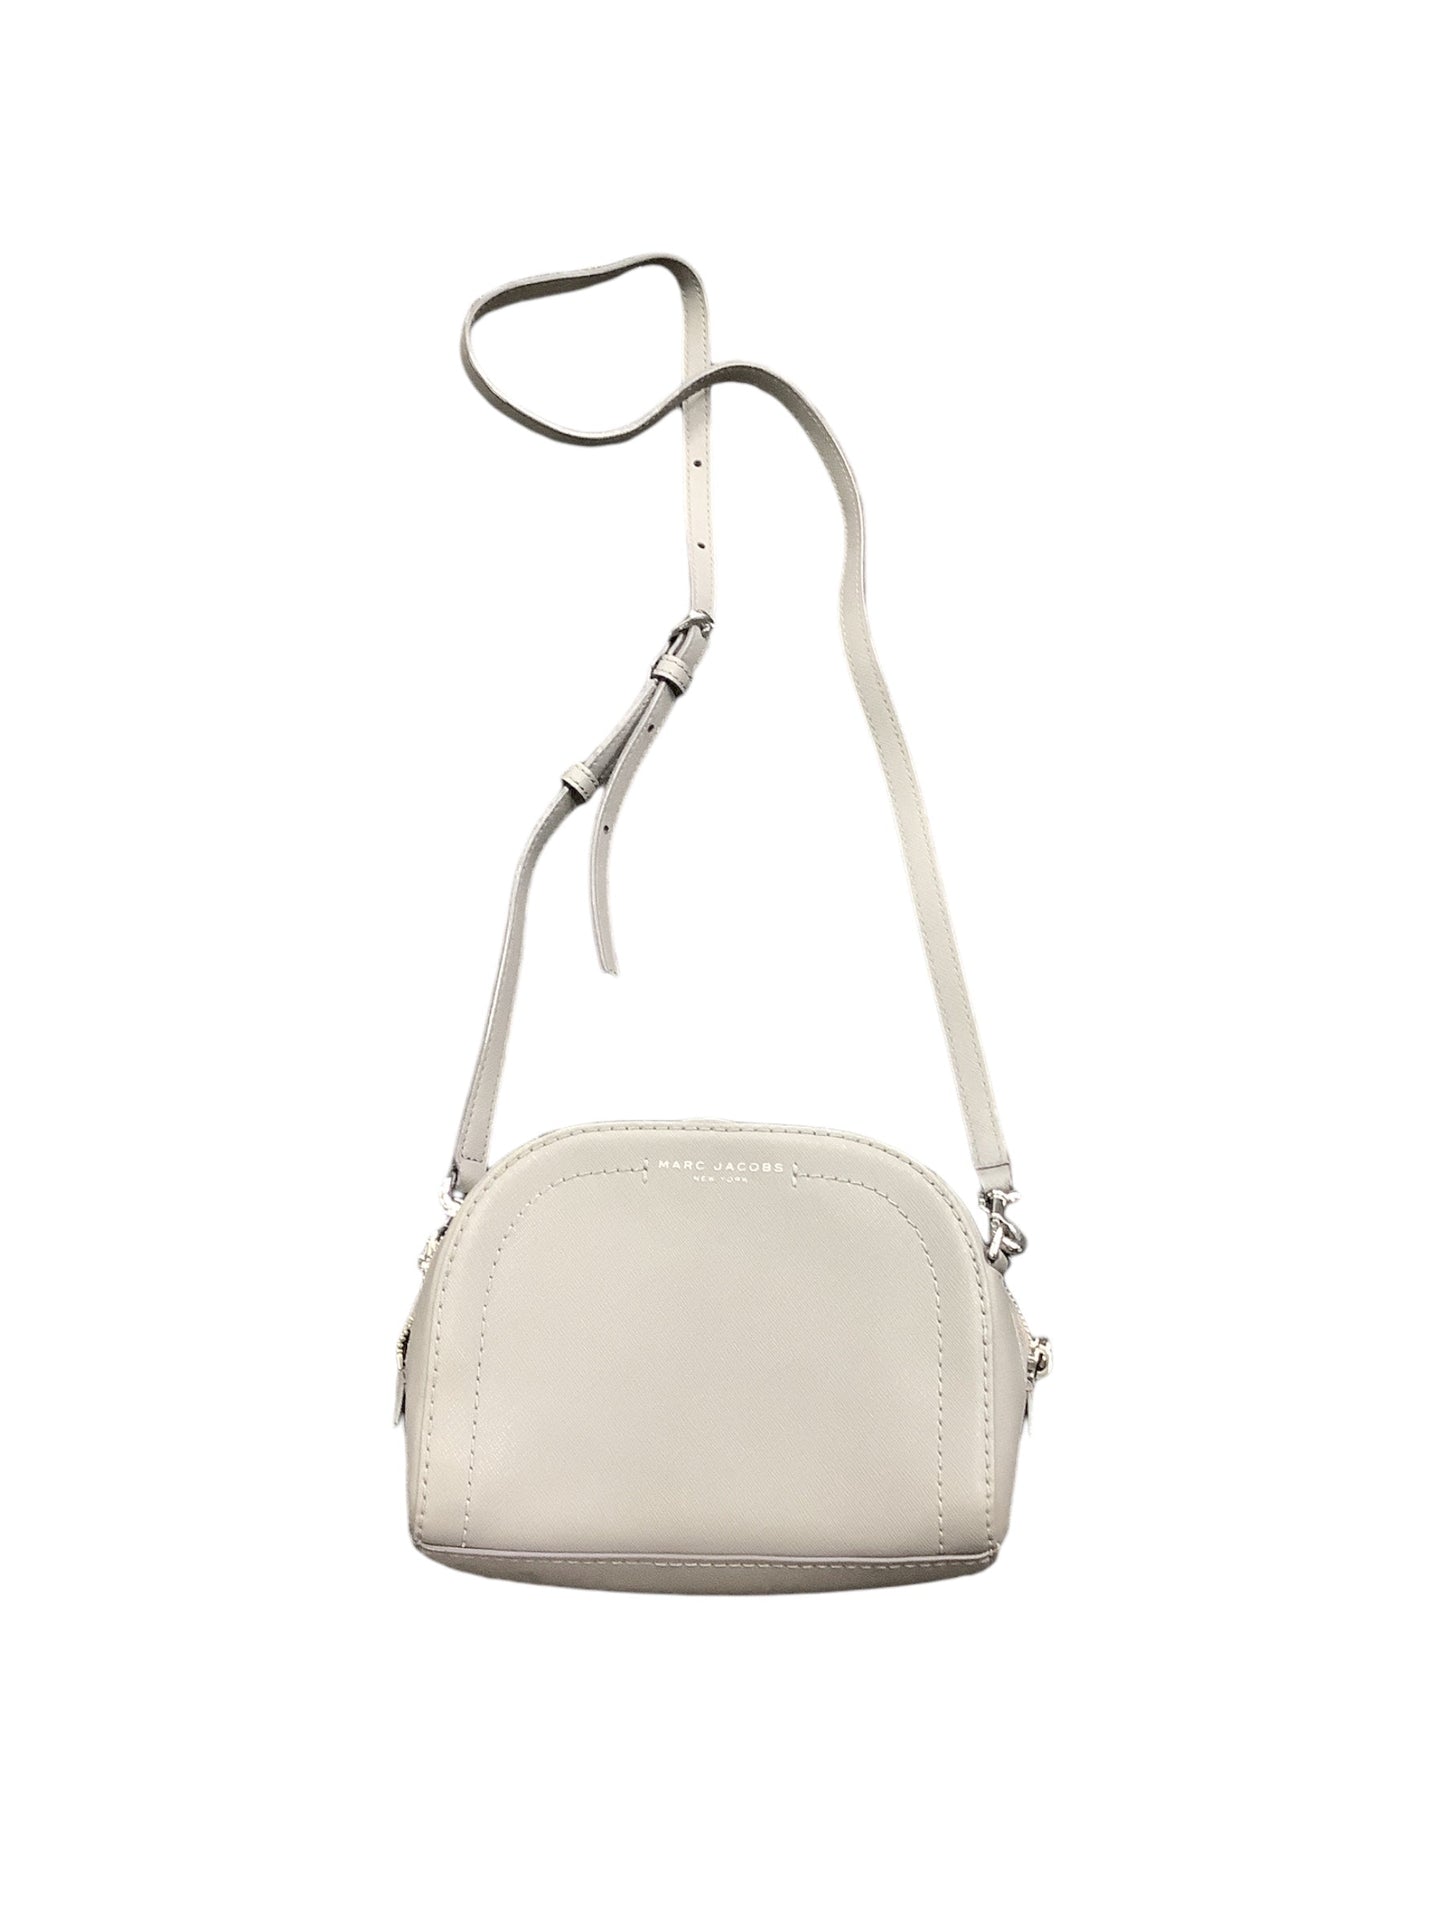 Crossbody Designer By Marc Jacobs  Size: Small